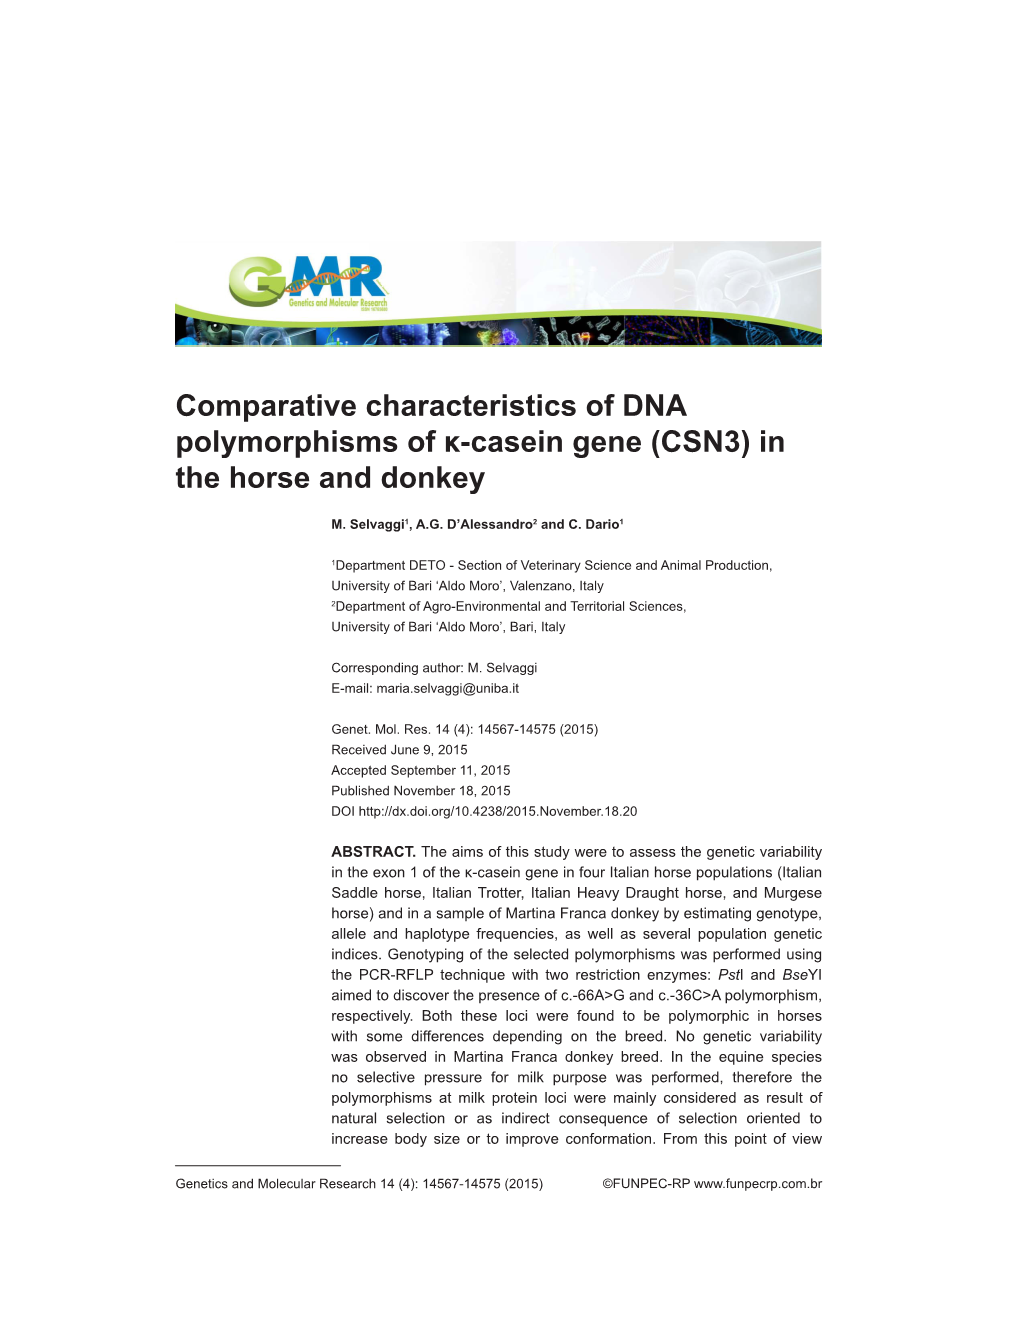 Comparative Characteristics of DNA Polymorphisms of Κ-Casein Gene (CSN3) in the Horse and Donkey